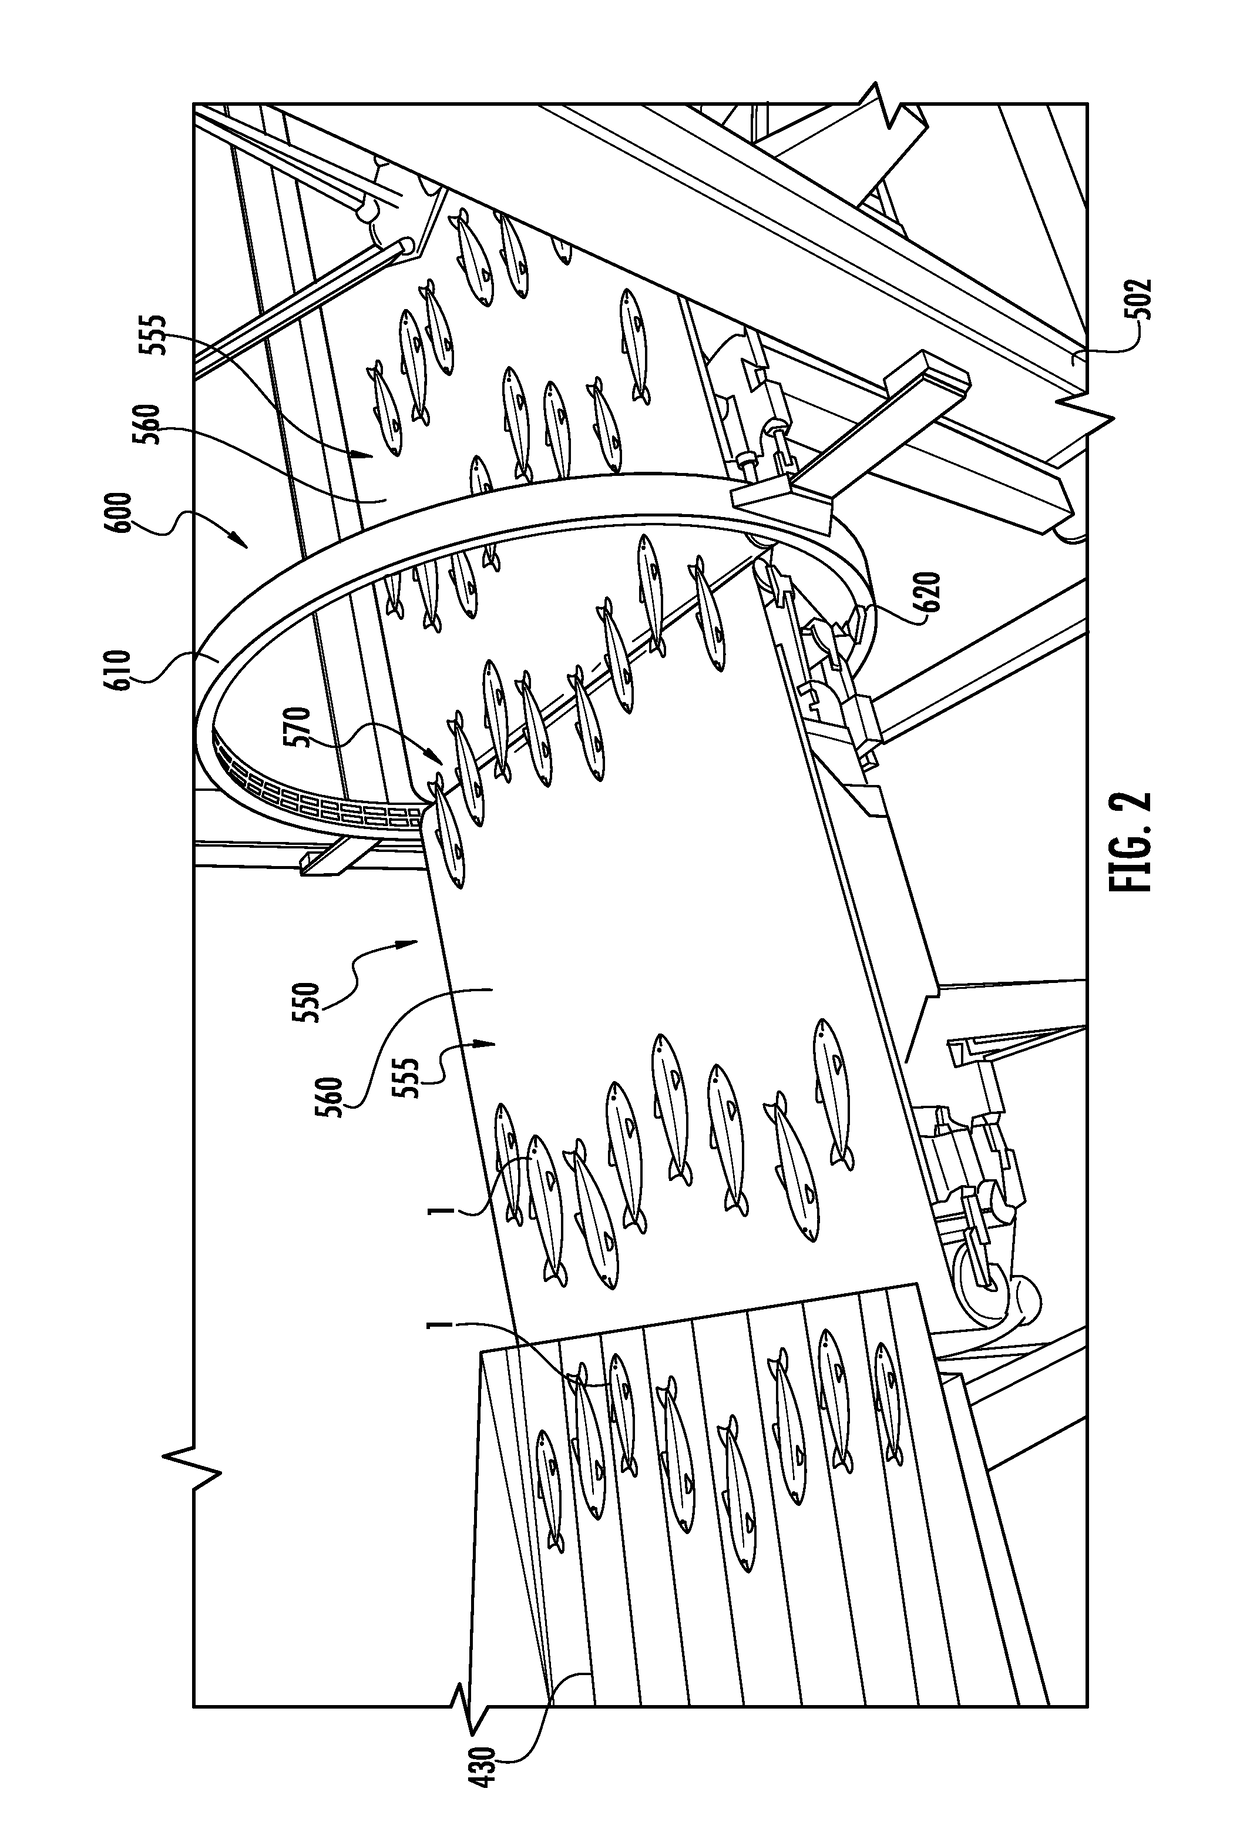 Live fish processing system, and associated methods